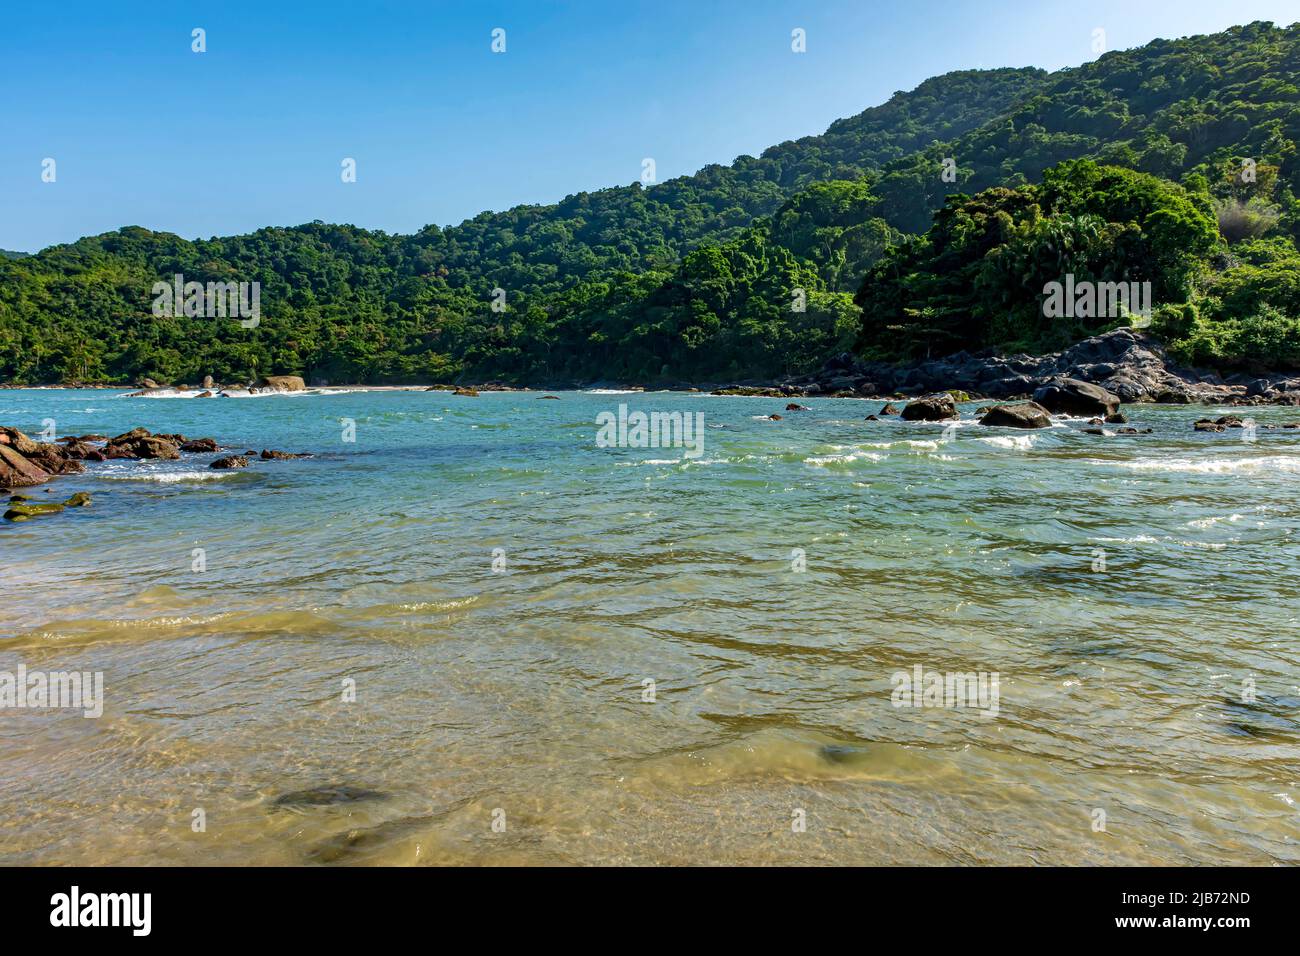 Paradise tropical beach with mountains and forests around in coastal Bertioga of Sao Paulo state, Brazil Stock Photo